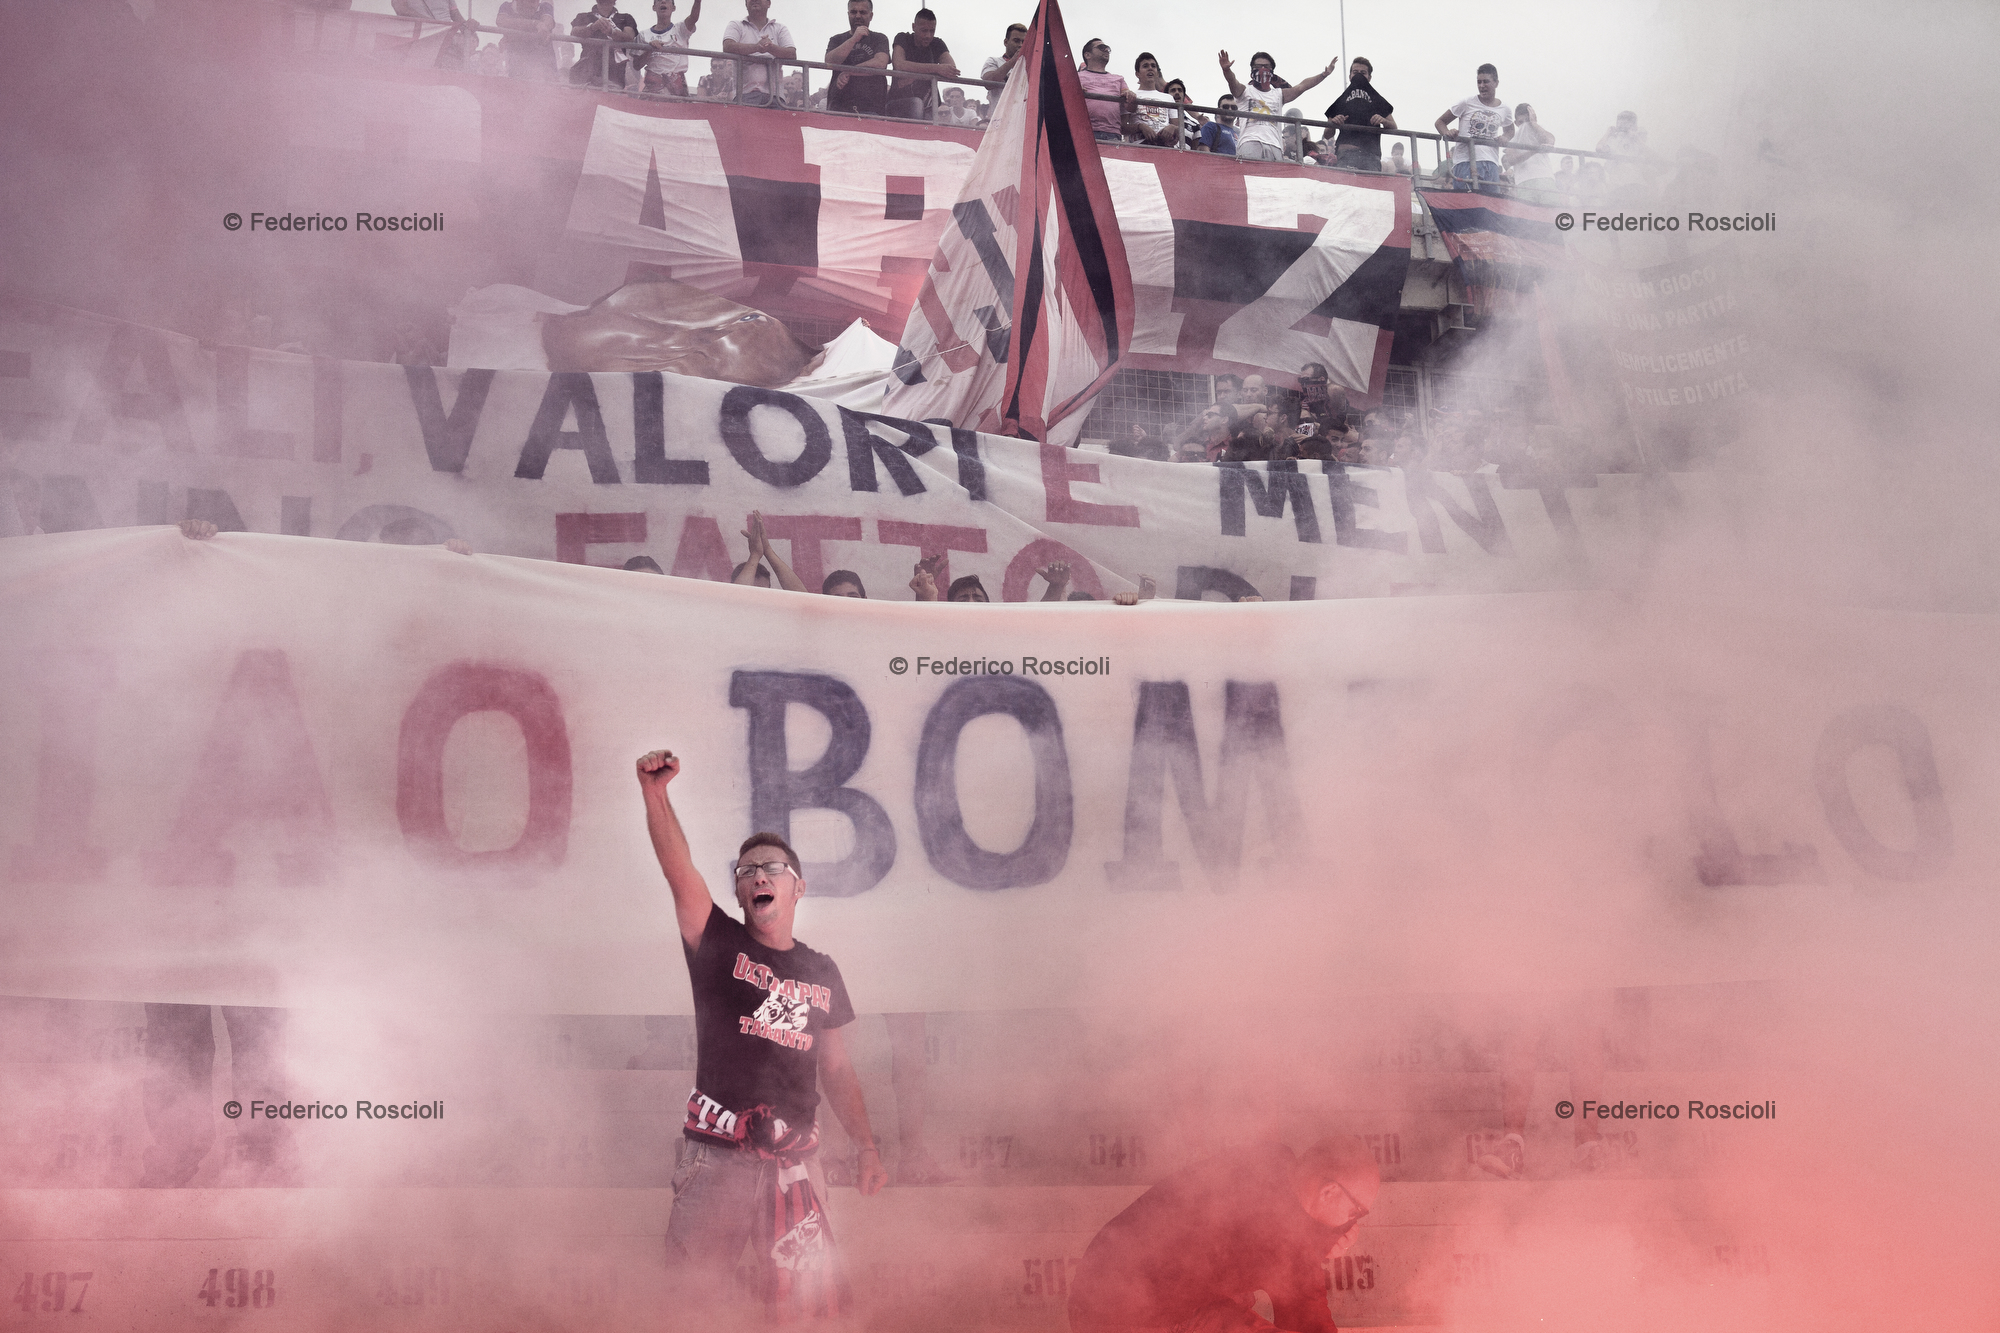 Taranto, Italy, September 29, 2013. Supporters remembering one of their buddy passed away with smoke and banners in Erasmo Iacovone Stadium in Taranto. Taranto Calcio plays actually in 4th division, due to the failure of the society, anyway it has an average attendance of around 2500 supporters. In the past taranto played 32 seasons in second division. The 'curva', in 1977 and 2001, was awarded as the best of Italy.